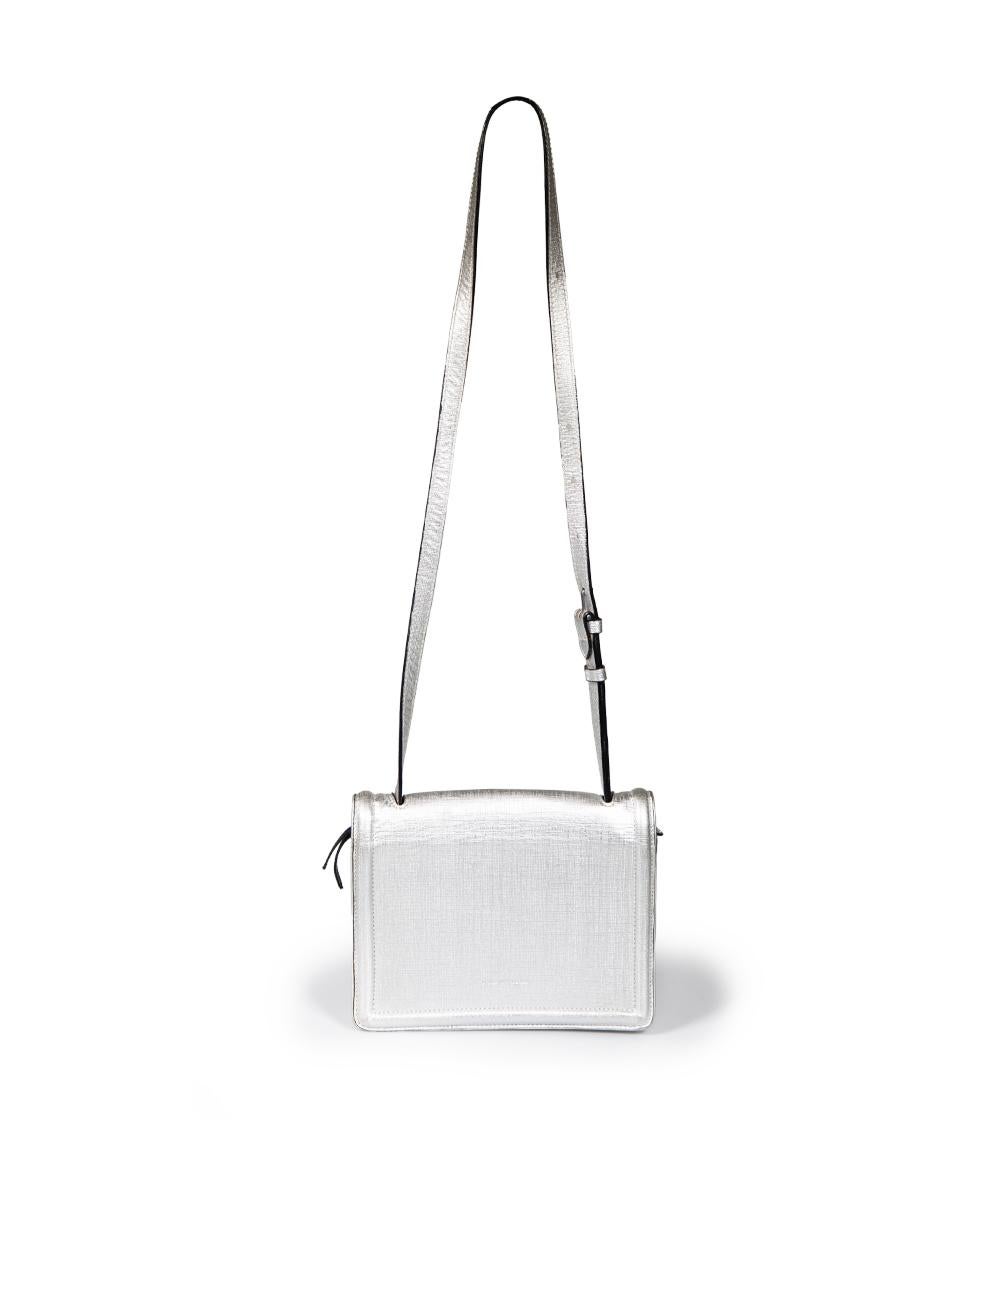 Dries Van Noten Silver Leather Flap Crossbody Bag In Excellent Condition In London, GB